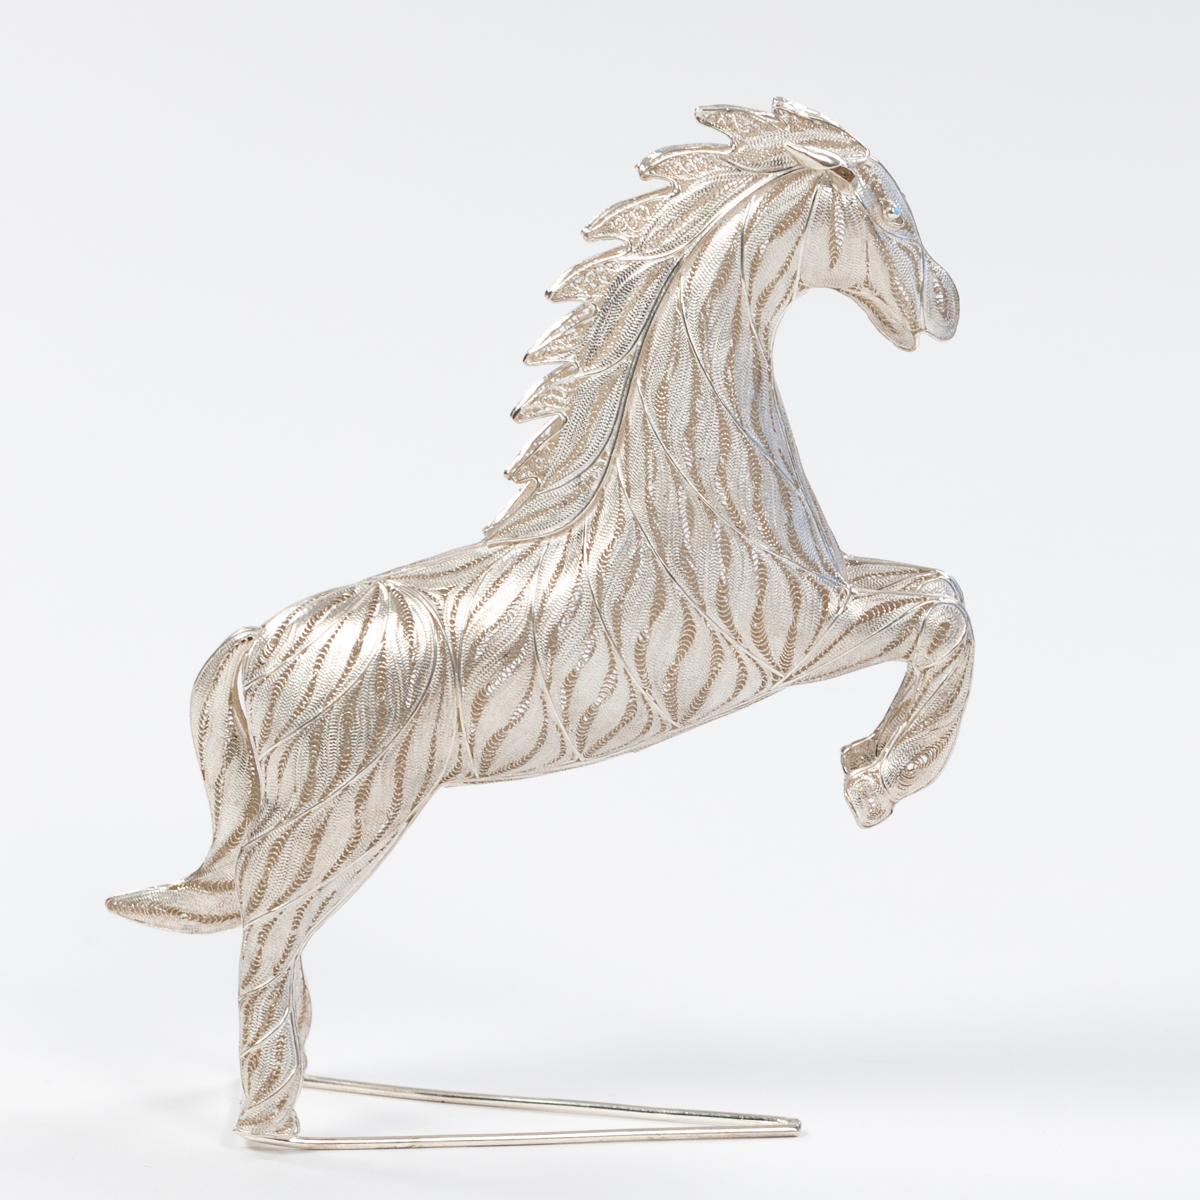 This sculpture in 925 silver of a Jumping Horse is a true masterpiece of filigree technique.
Filigree comes from the Latin and consists of 2 words filum (thread) and granum (grain).
With the filigree technique, jewelry and objects are made from